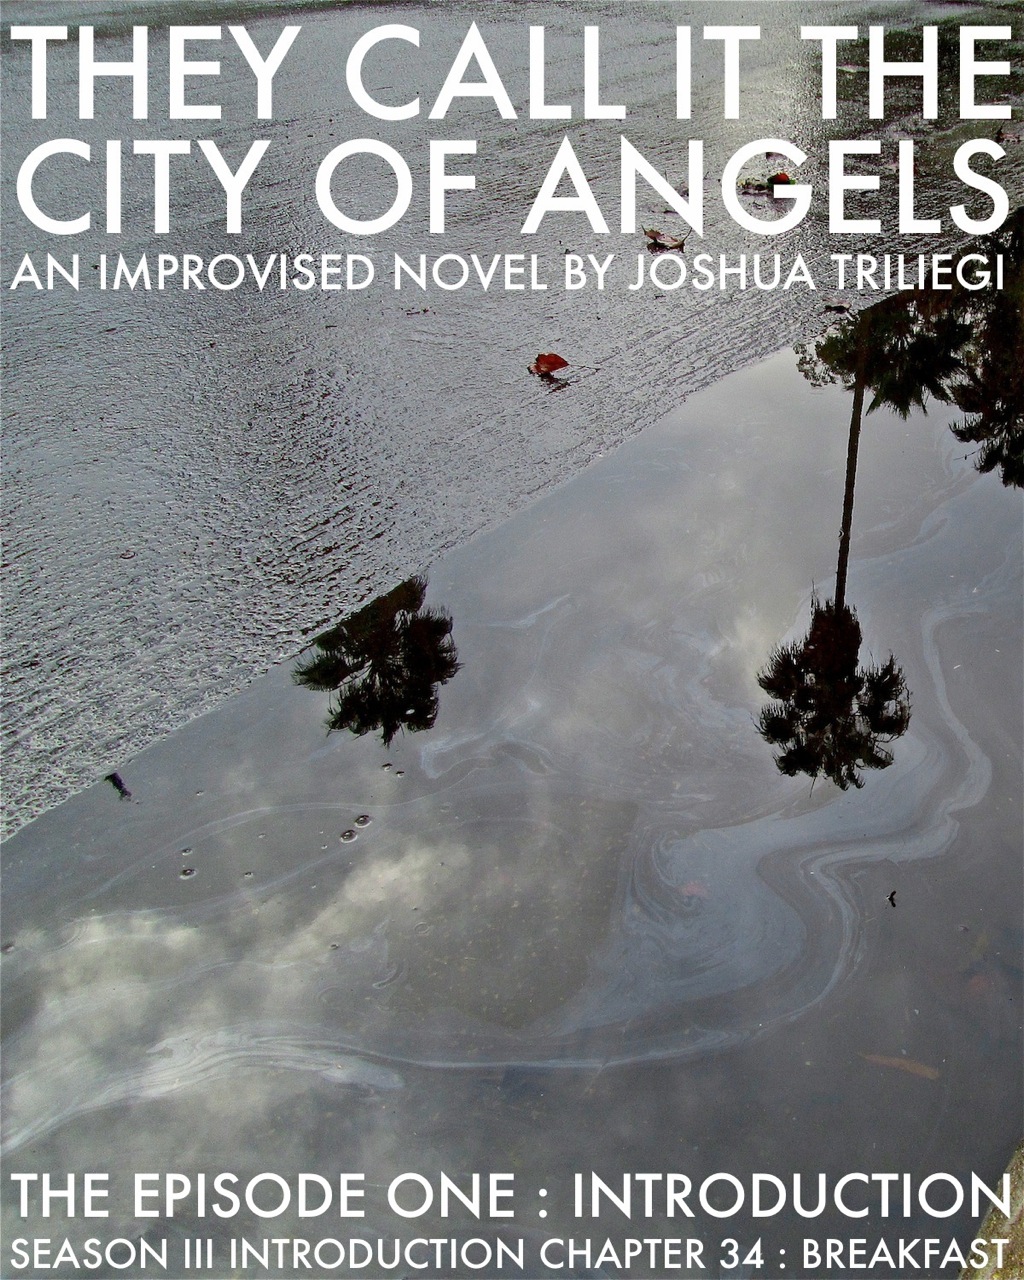 READ EPISODE ONE: THEY CALL IT THE CITY OF ANGELS